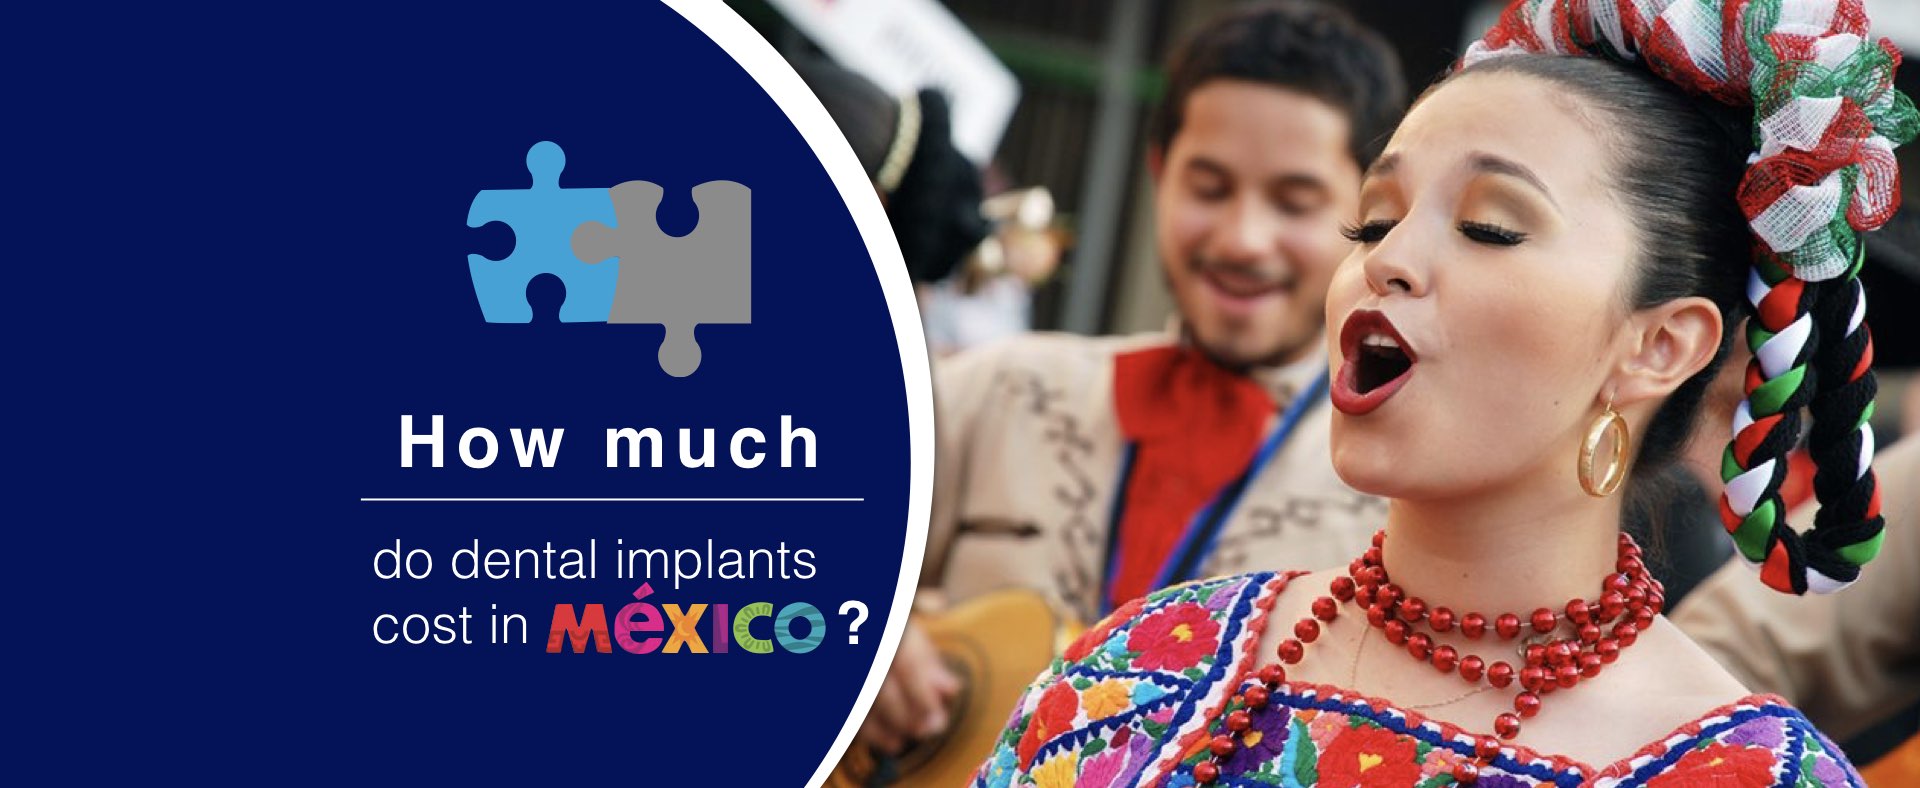 How much do dental implants cost in Mexico?